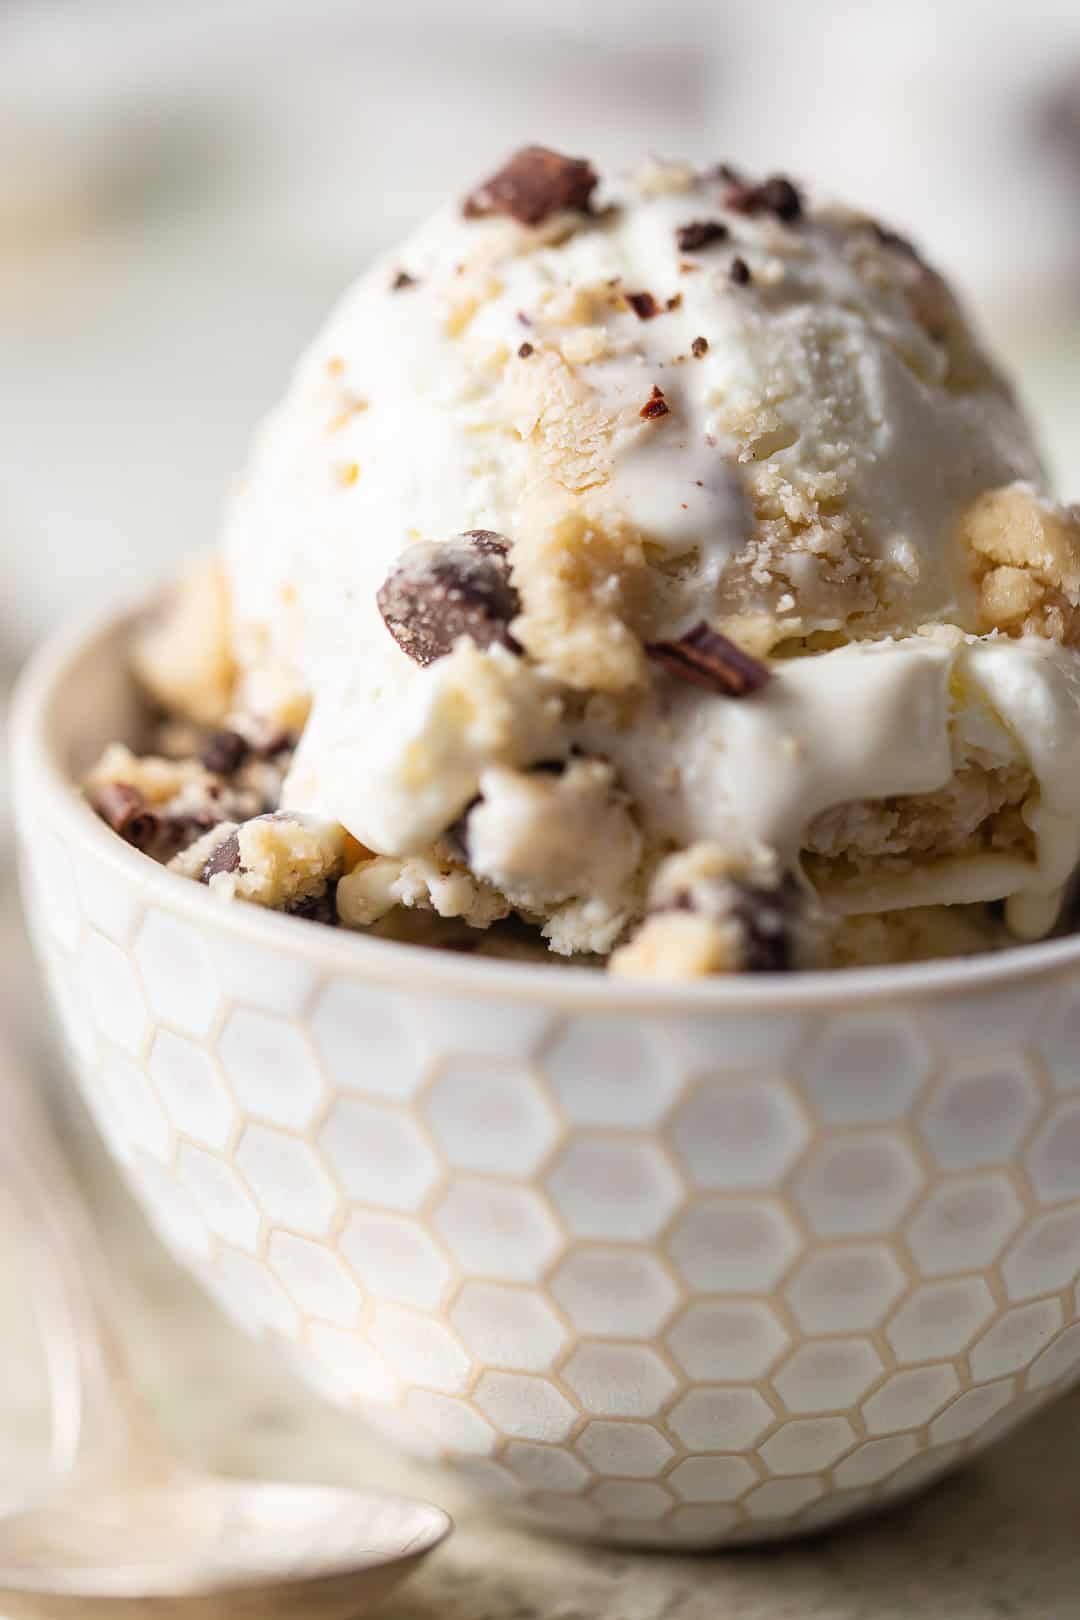 Cookie dough ice cream recipe, prepared and served in a small bowl with a vintage silver spoon.